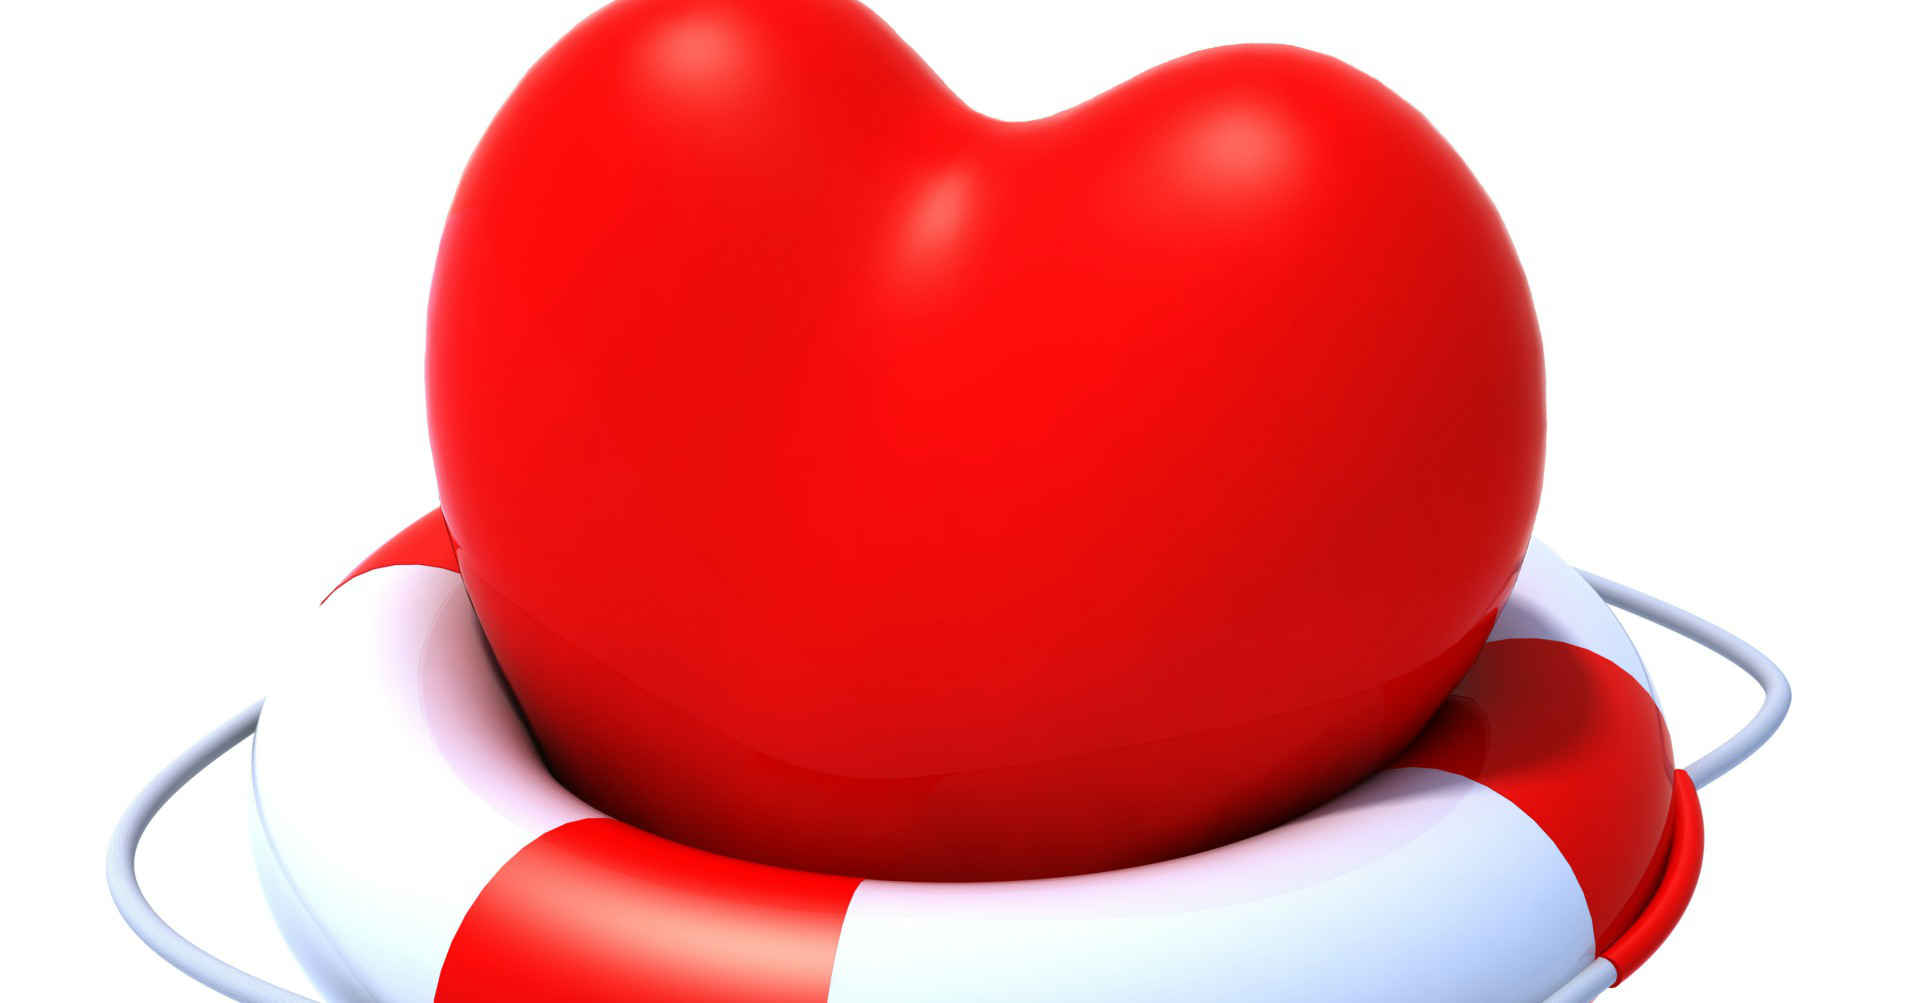 Learn how to prevent cardiovascular disease